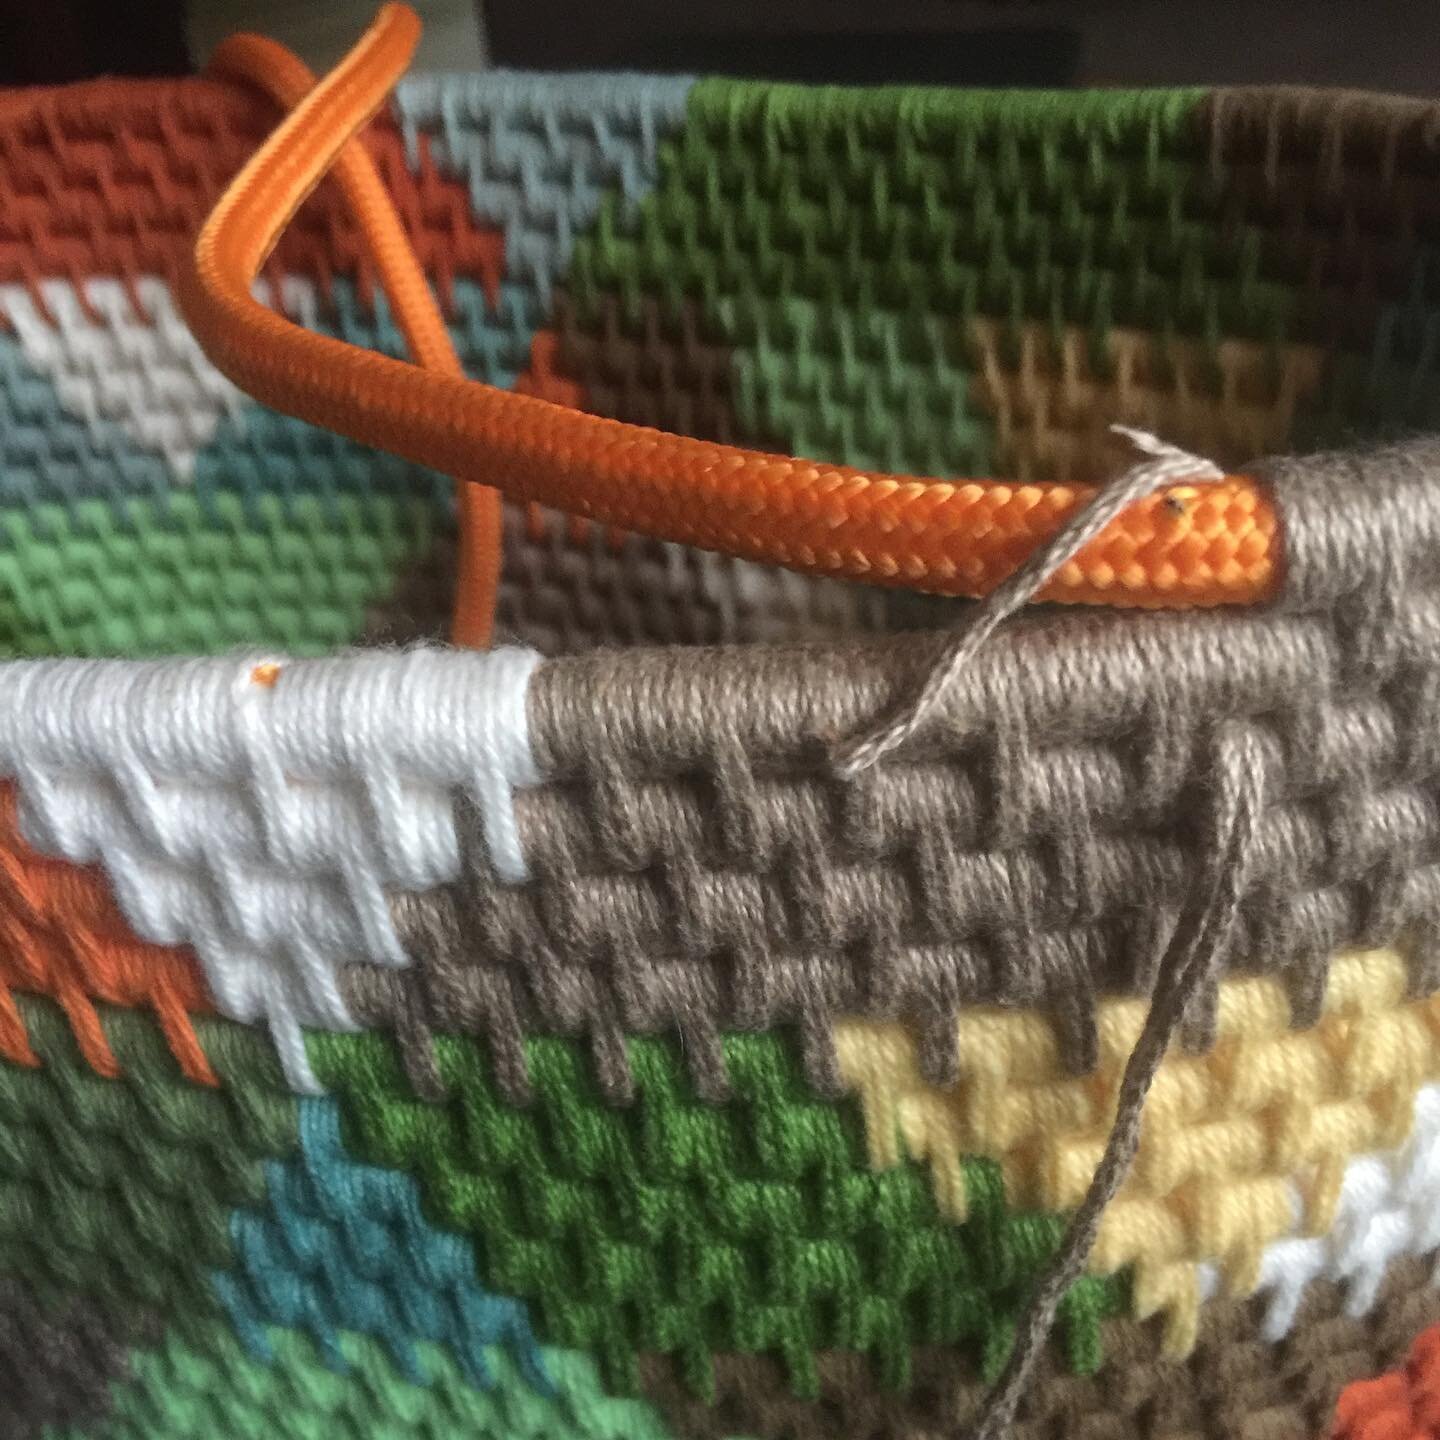 I think it&rsquo;s become an addictive compulsion to just keep coiling and stitching... but the last few baskets reference the pattern on my paintings...
.
.
.
#making #creating #doing #patterns #coiling #coilingbaskets #stitching #cottonandrope #slo